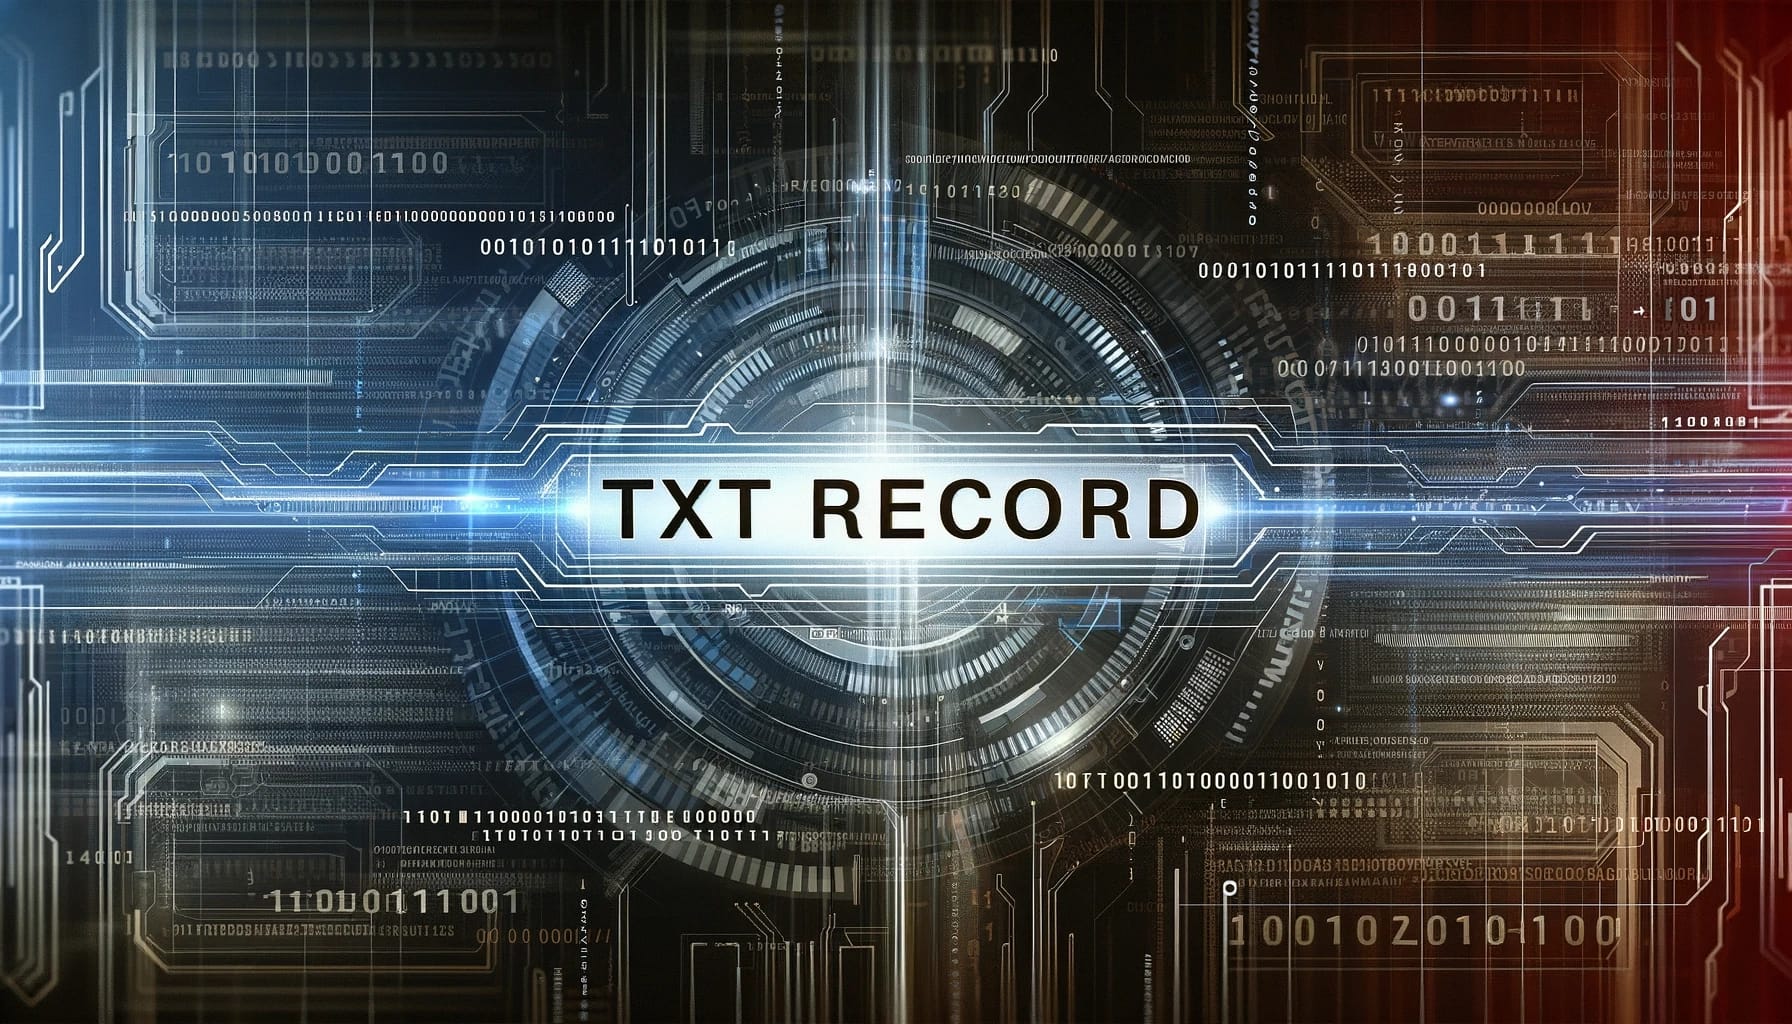 What is a TXT record?